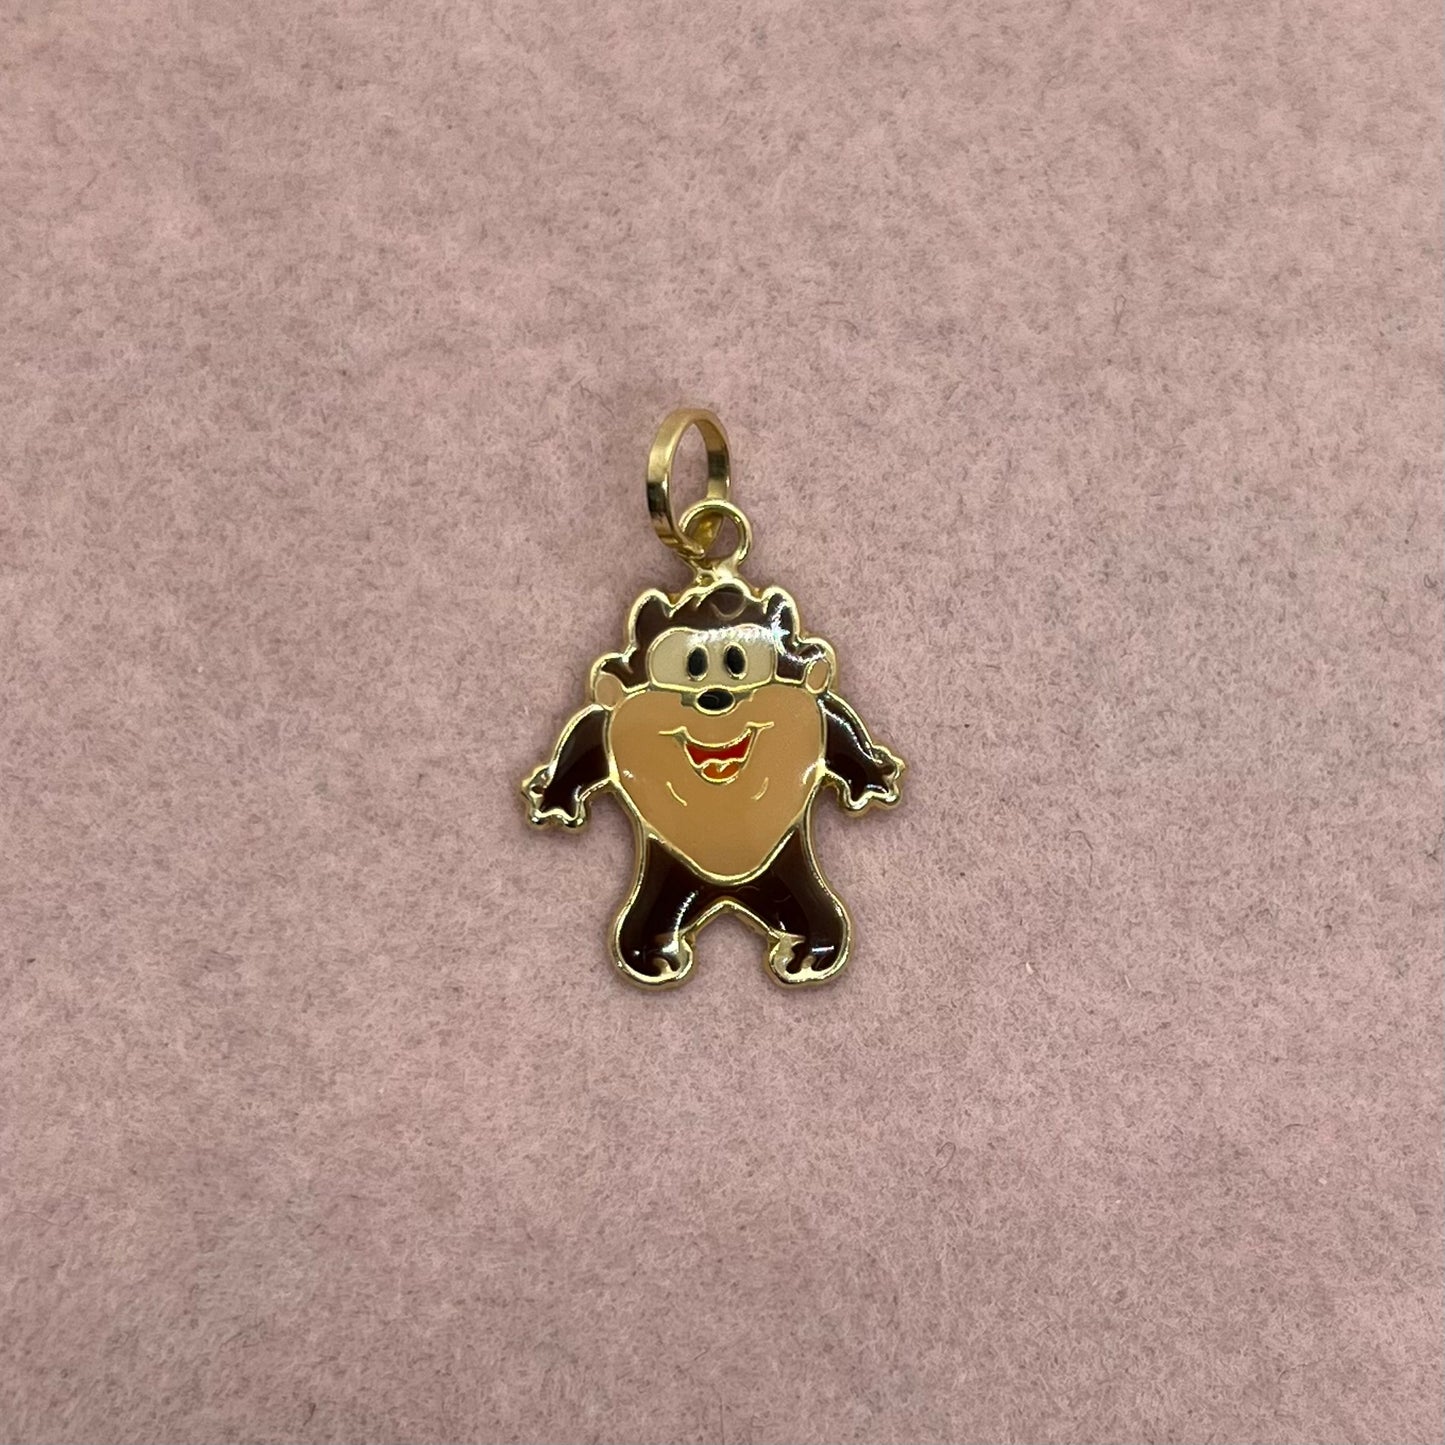 Baby Looney Tunes Enamel Charms from 2005